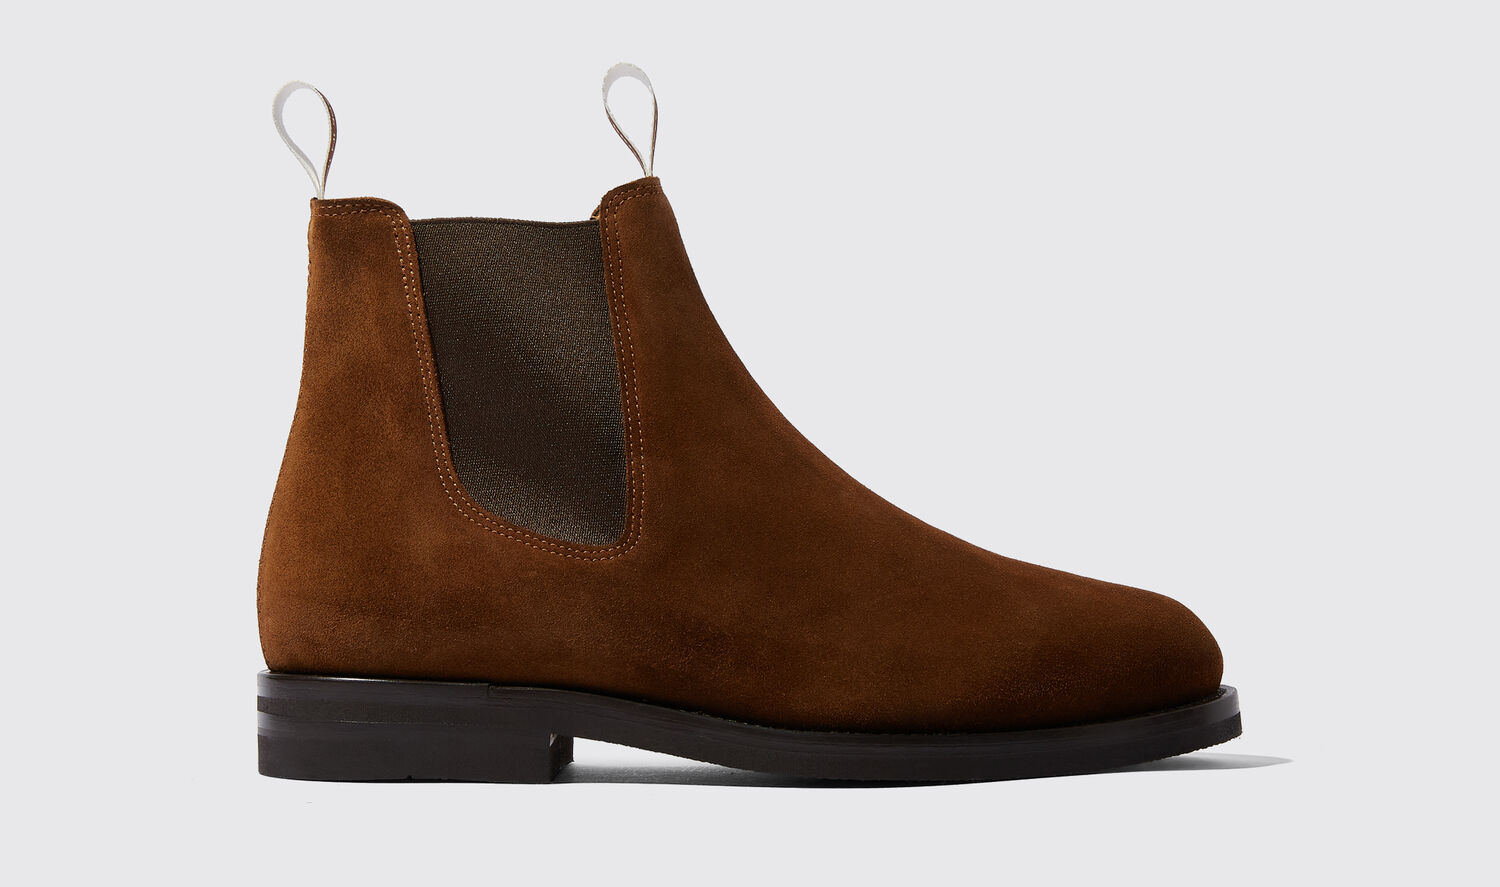 Scarosso Chelsea Boots William Iii Tobacco Suede Suede Leather In Tobacco - Suede